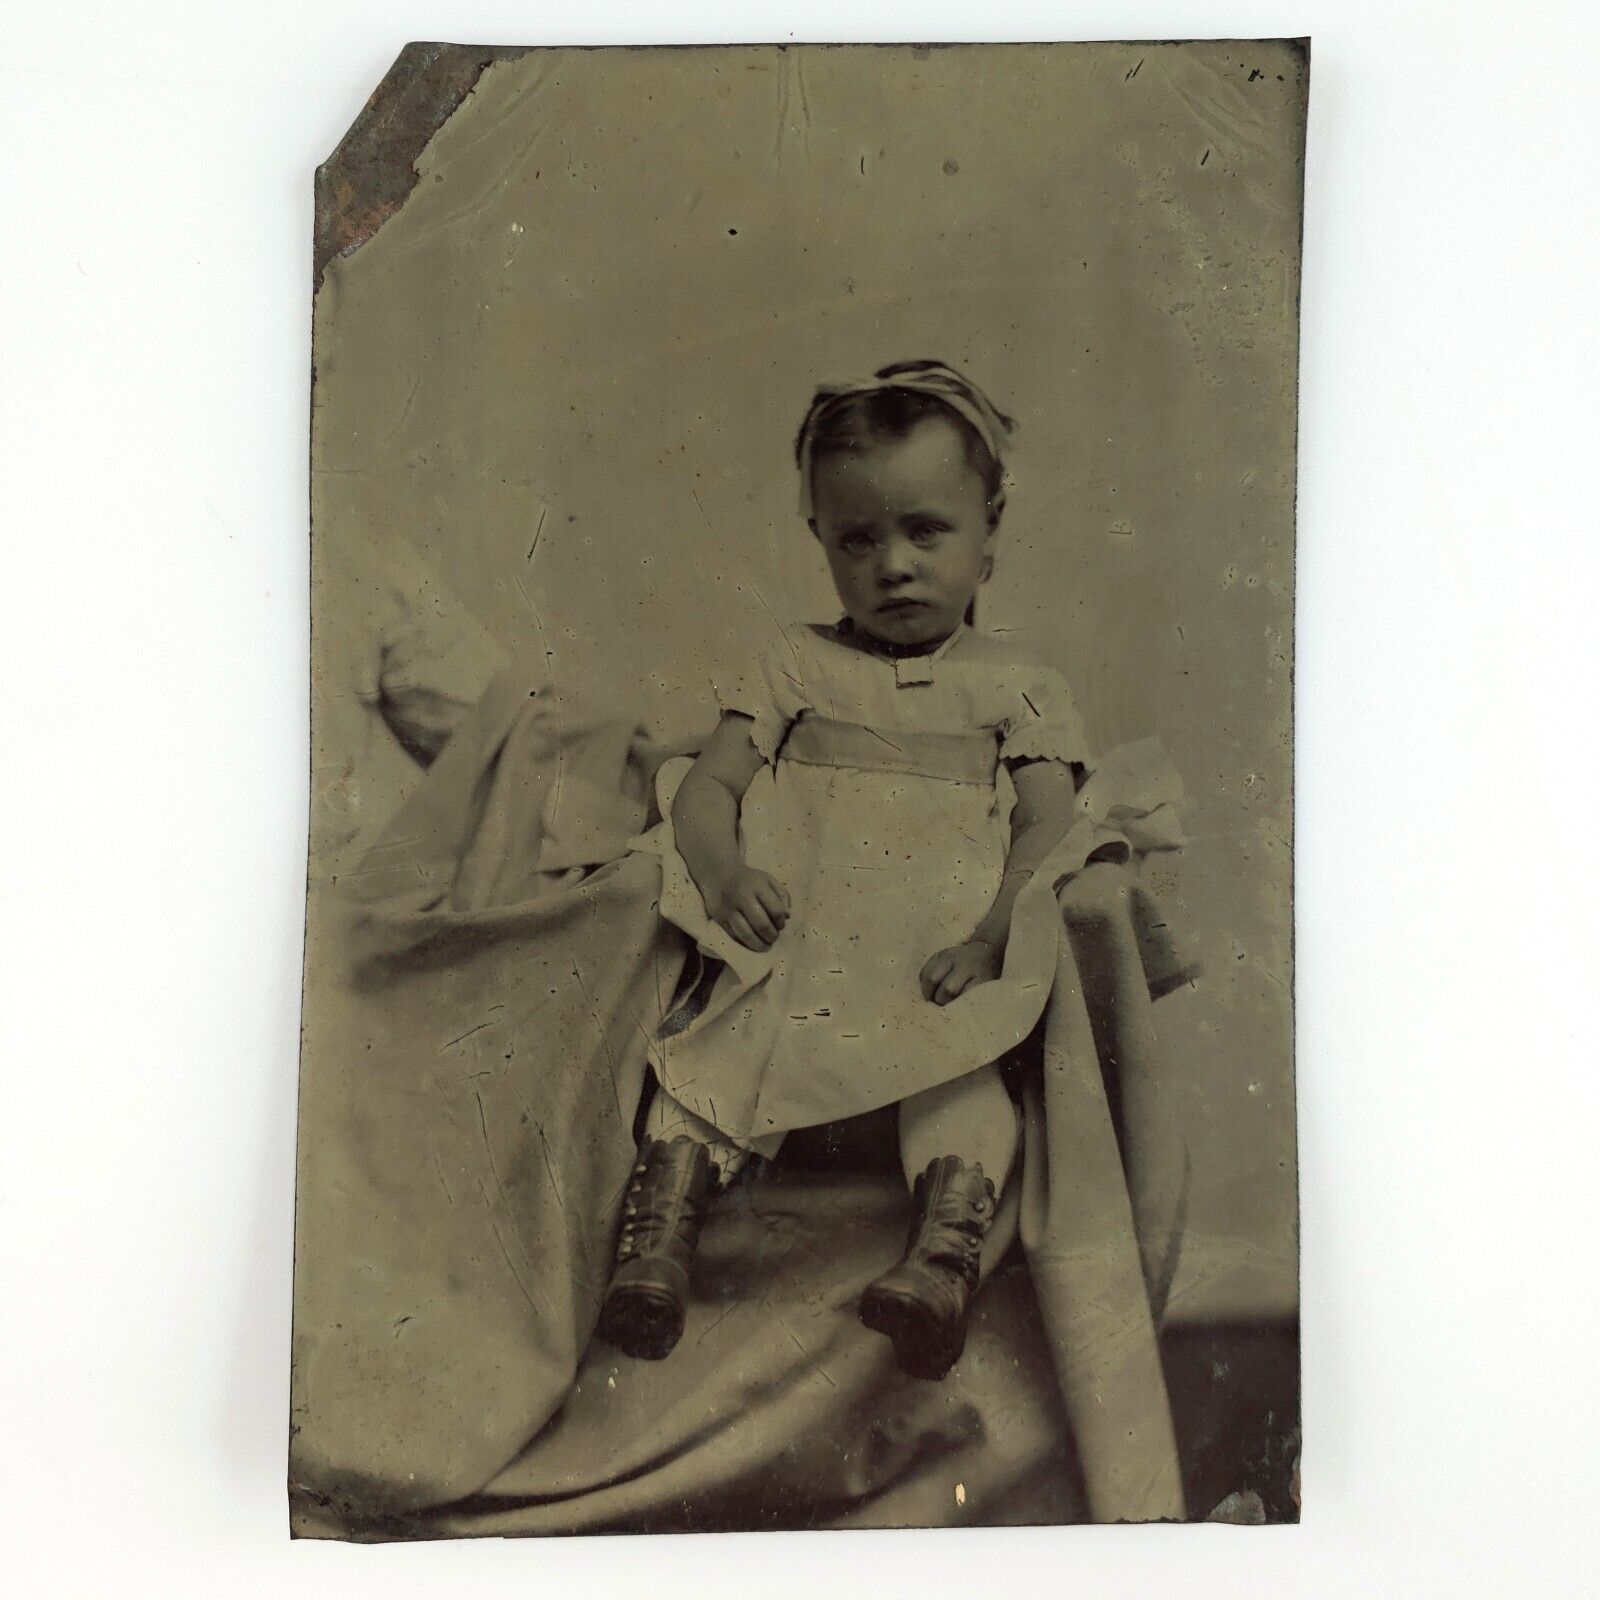 Revealed Hidden Mother Arm Tintype c1870 Antique 1/6 Plate Girl Kid Photo A3605